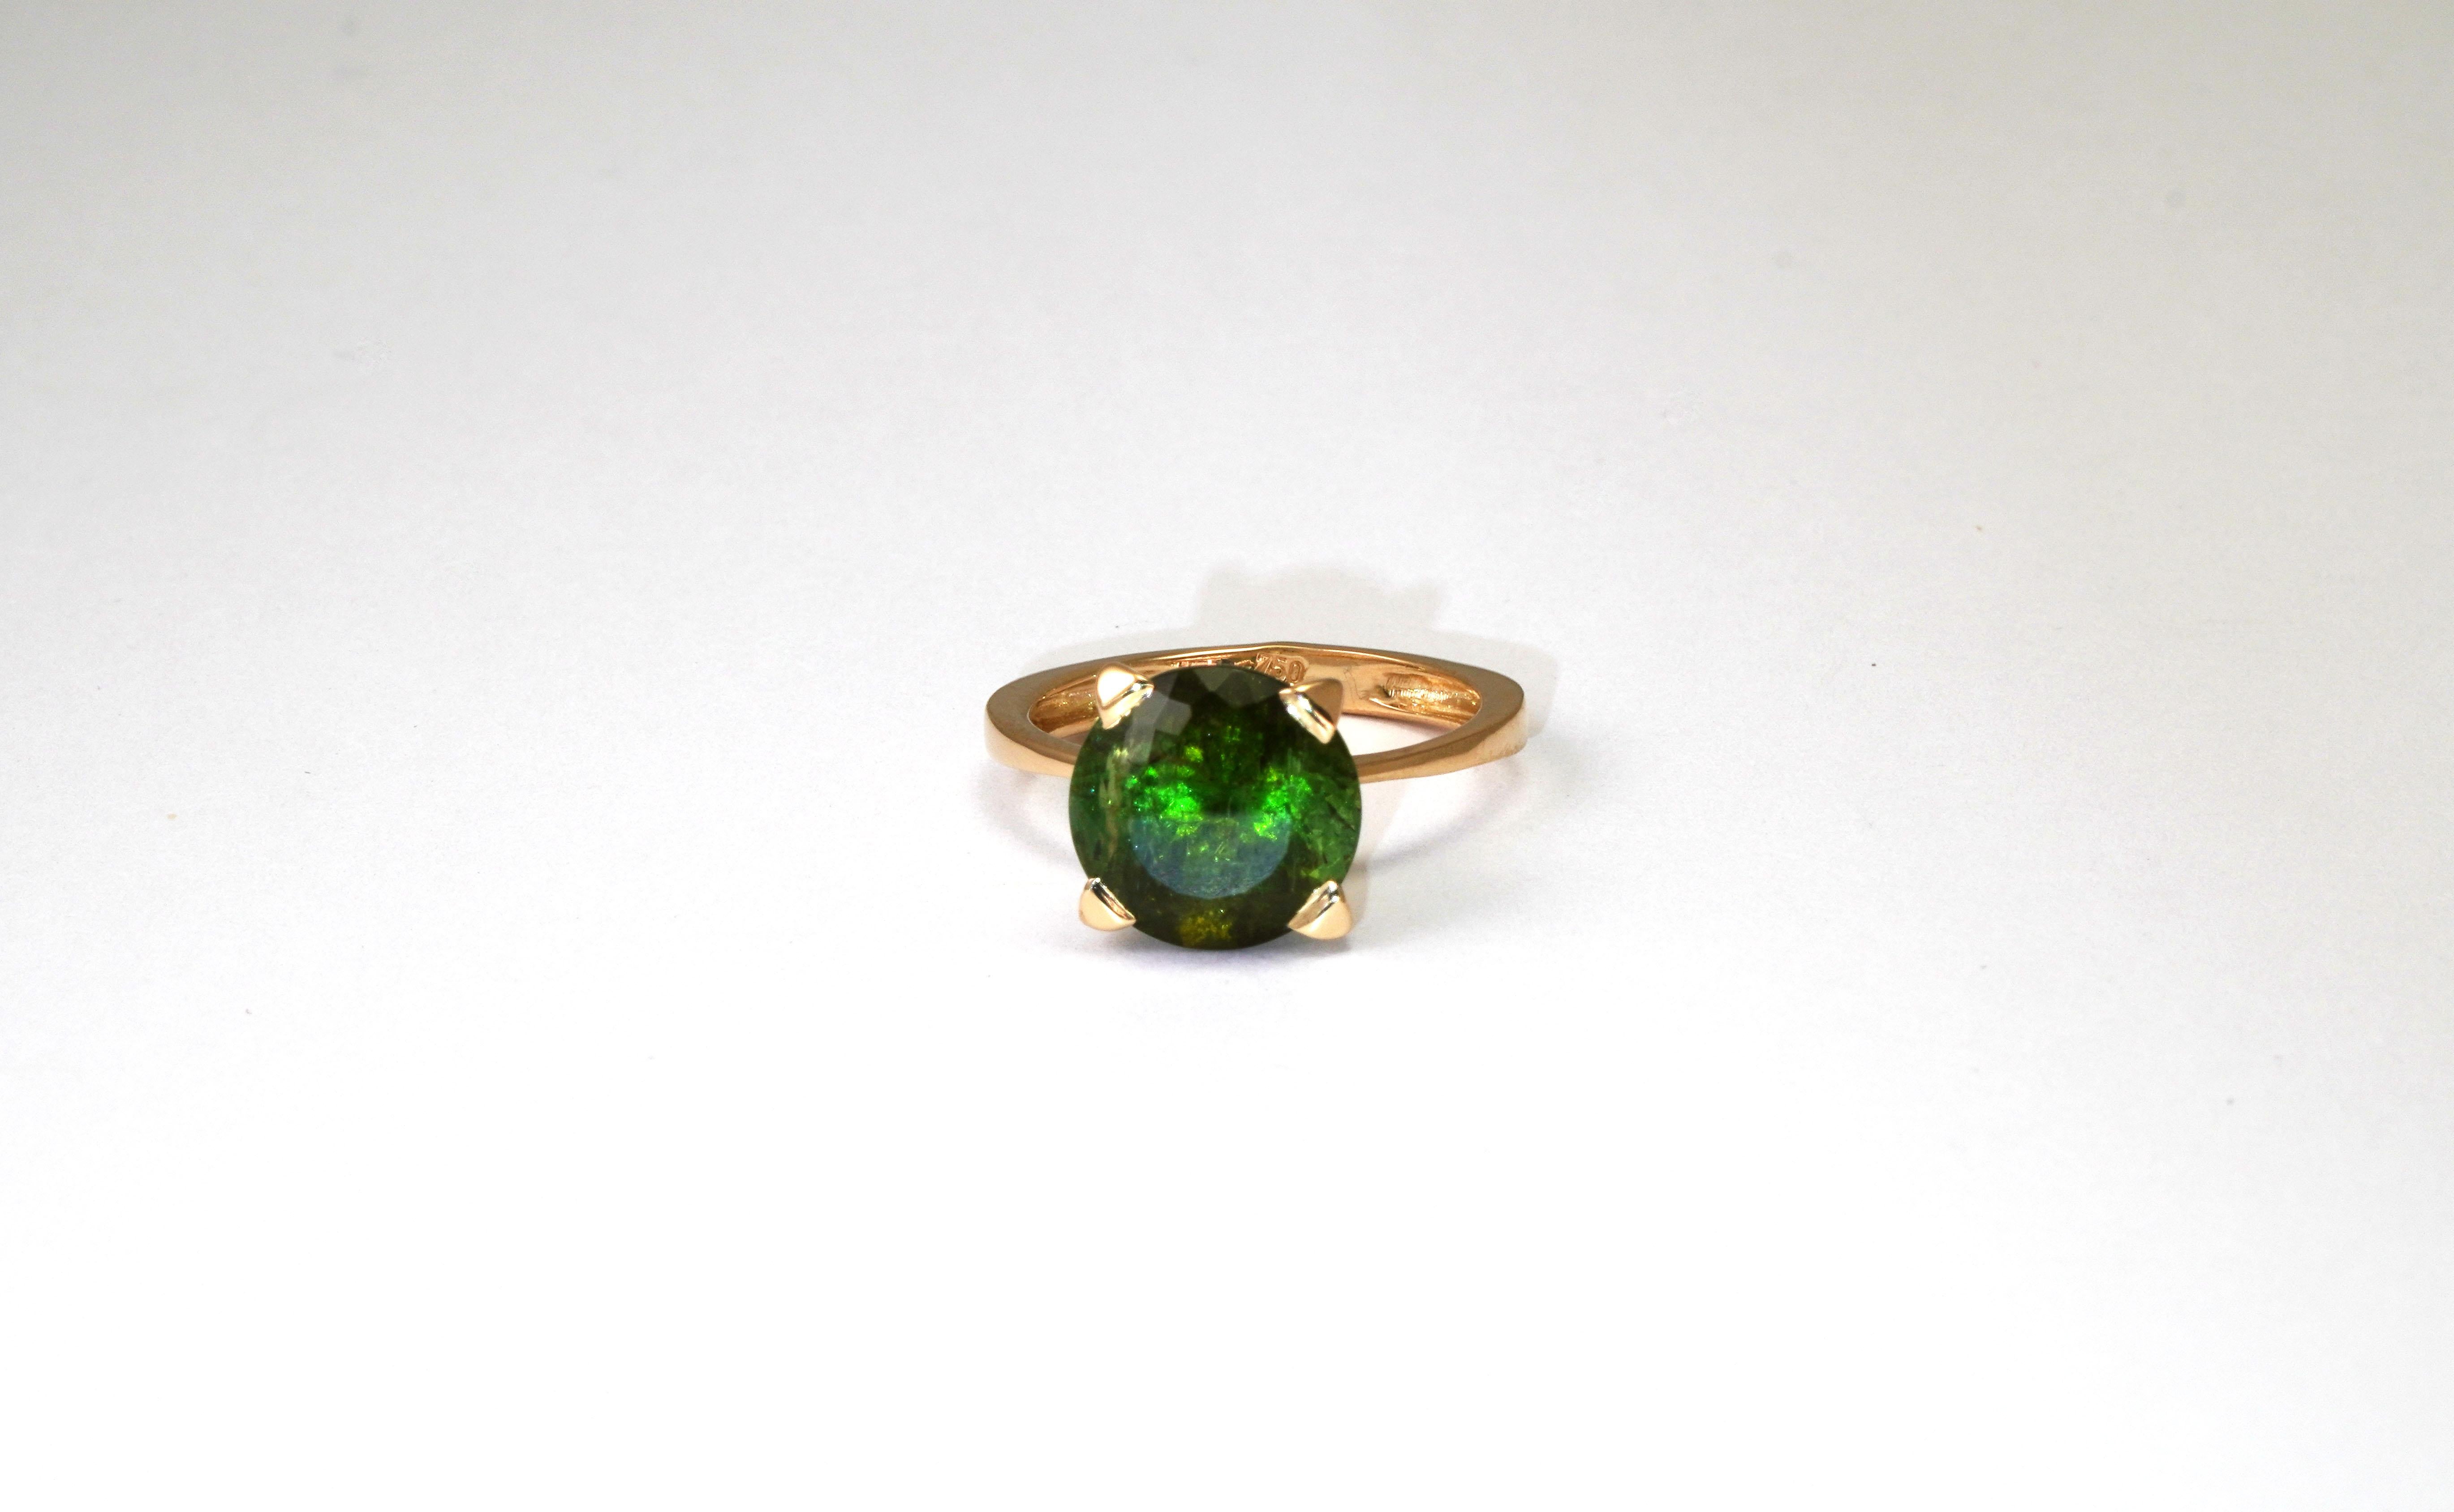 18 kt Yellow Gold ring with Green Tourmaline
Gold color: Yellow
Ring size: 6 1/2 US
Total weight: 3.71 grams

Set with:
- Tourmaline
Cut: Round
Weight: 5.35
Color: Green
Note: The stone has little natural collusion 